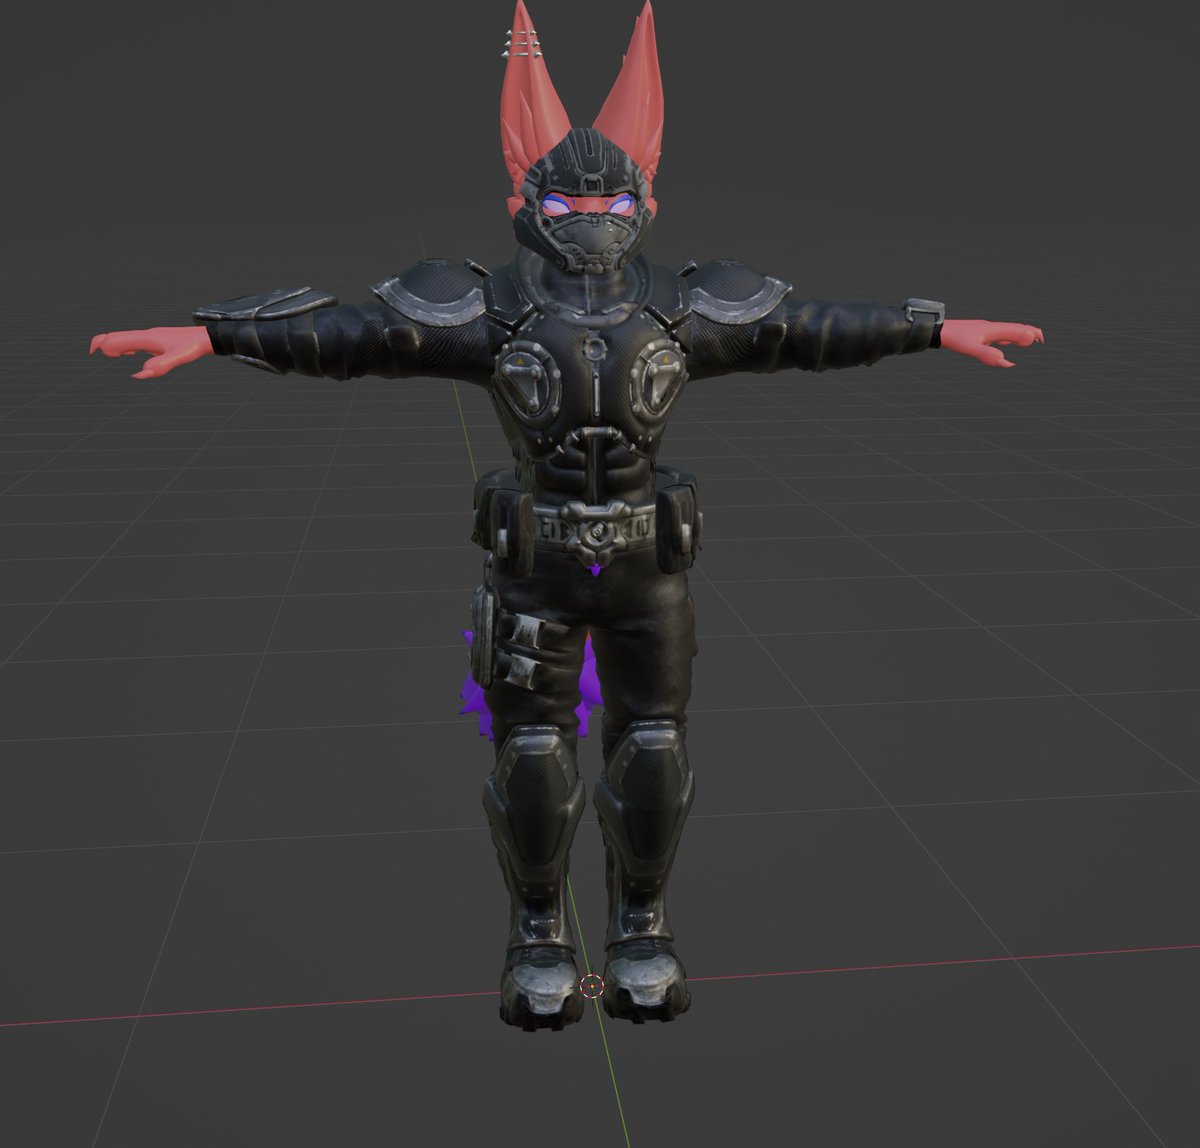 Working on this aswell for @EchoTheRedFlame

#novabeast #blender #GearsofWar #vrchat #vrcfurry